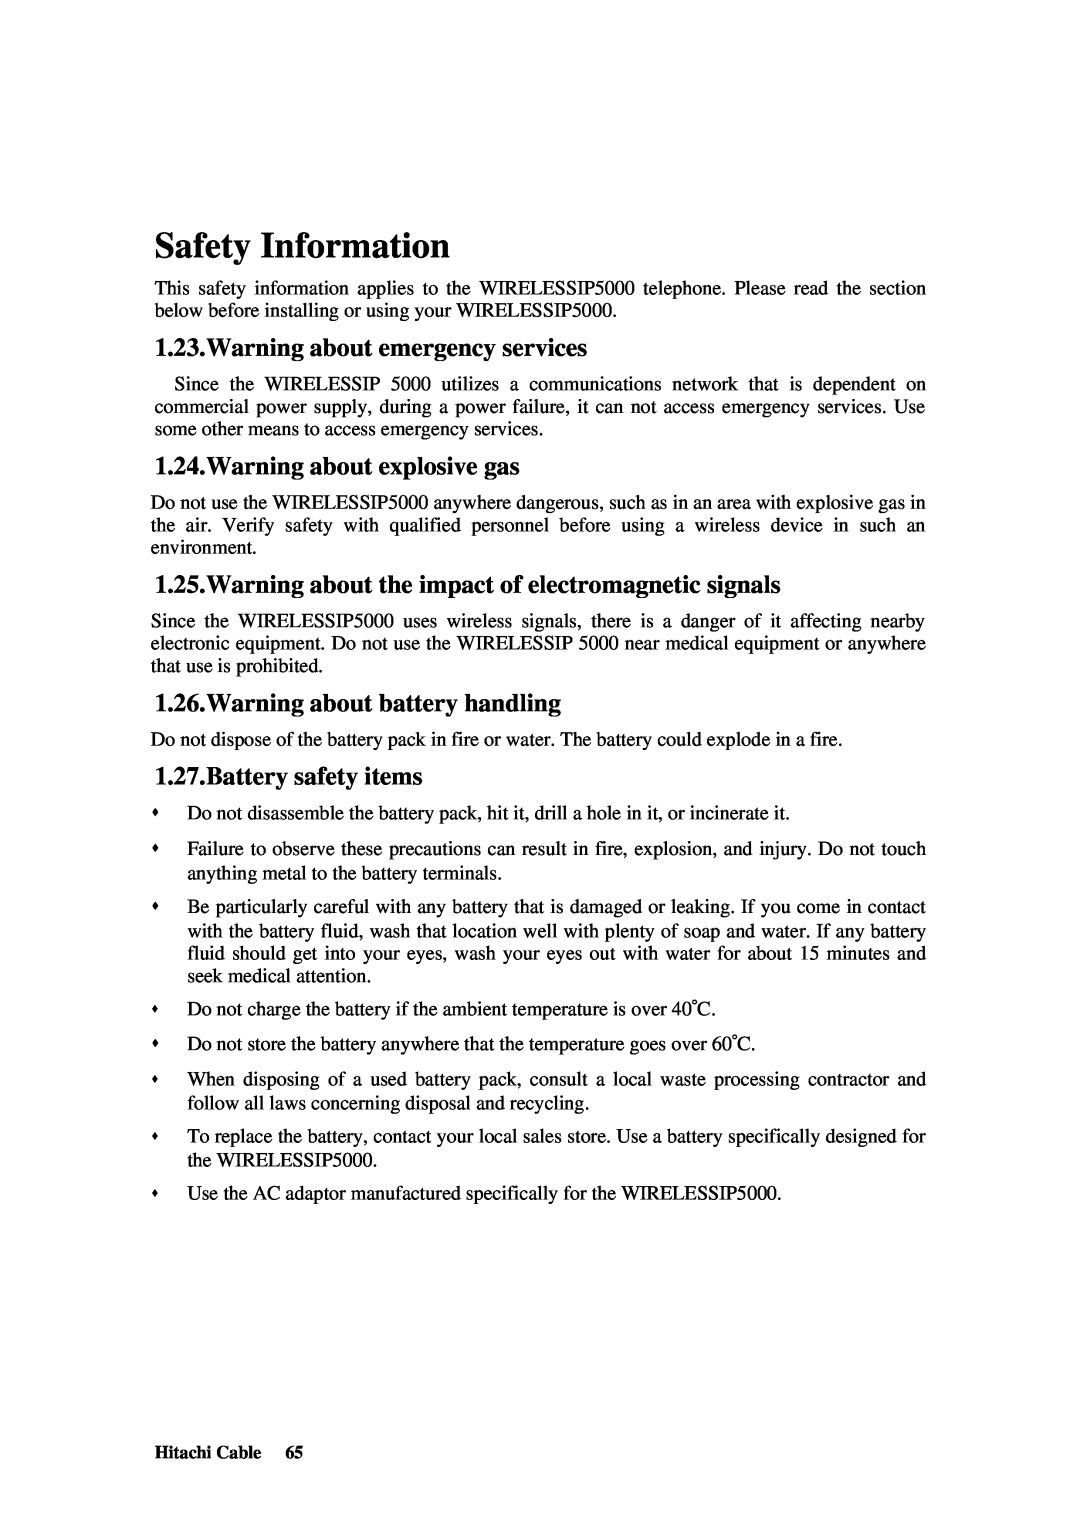 Hitachi TD61-2472 Safety Information, Warning about emergency services, Warning about explosive gas, Battery safety items 